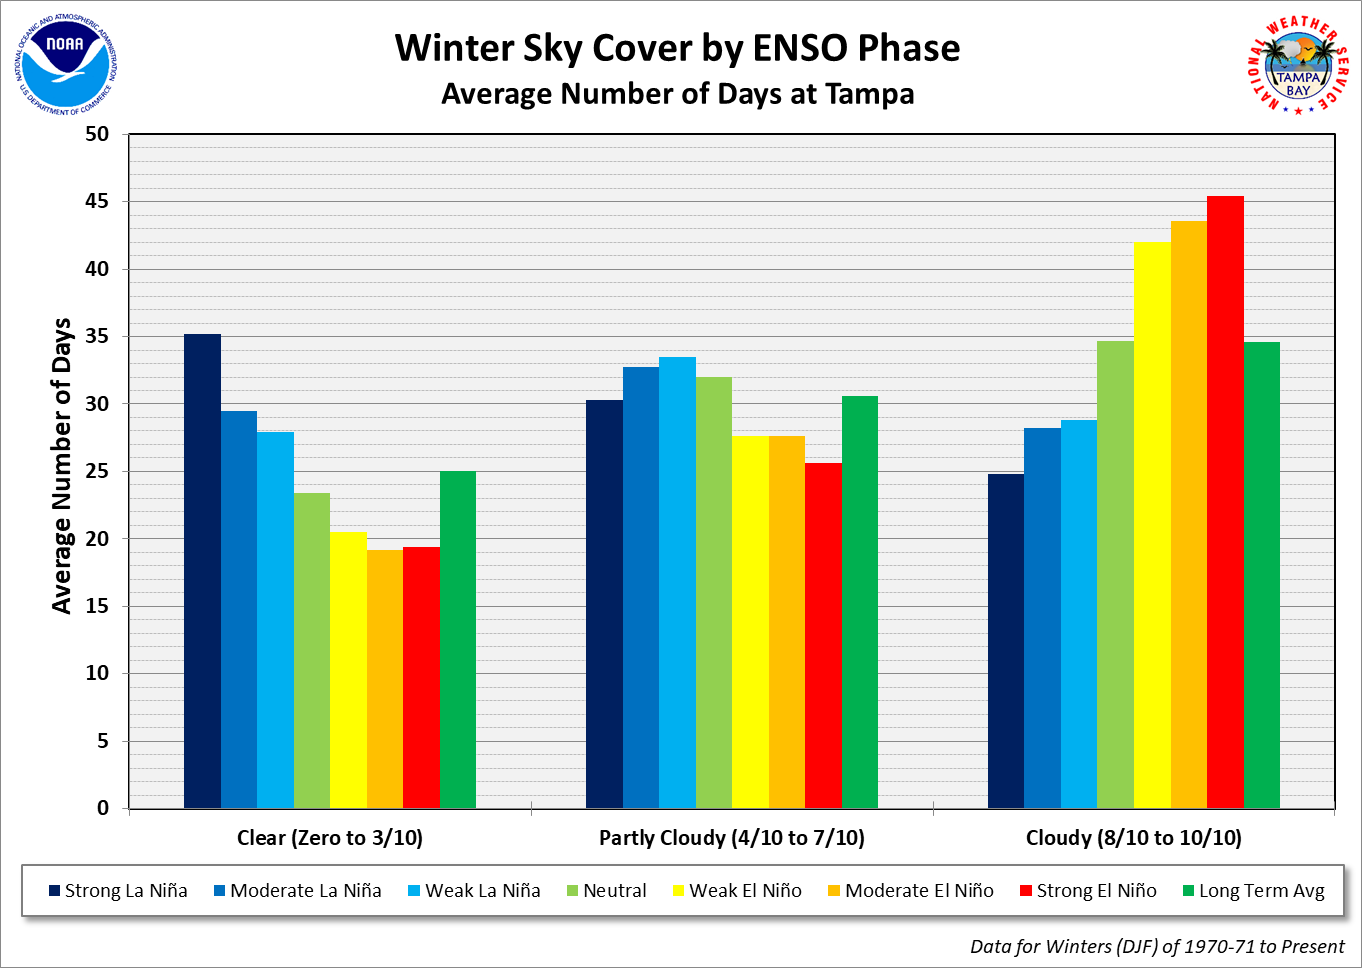 Tampa Winter Sky Cover Average Number of Days by ENSO Category